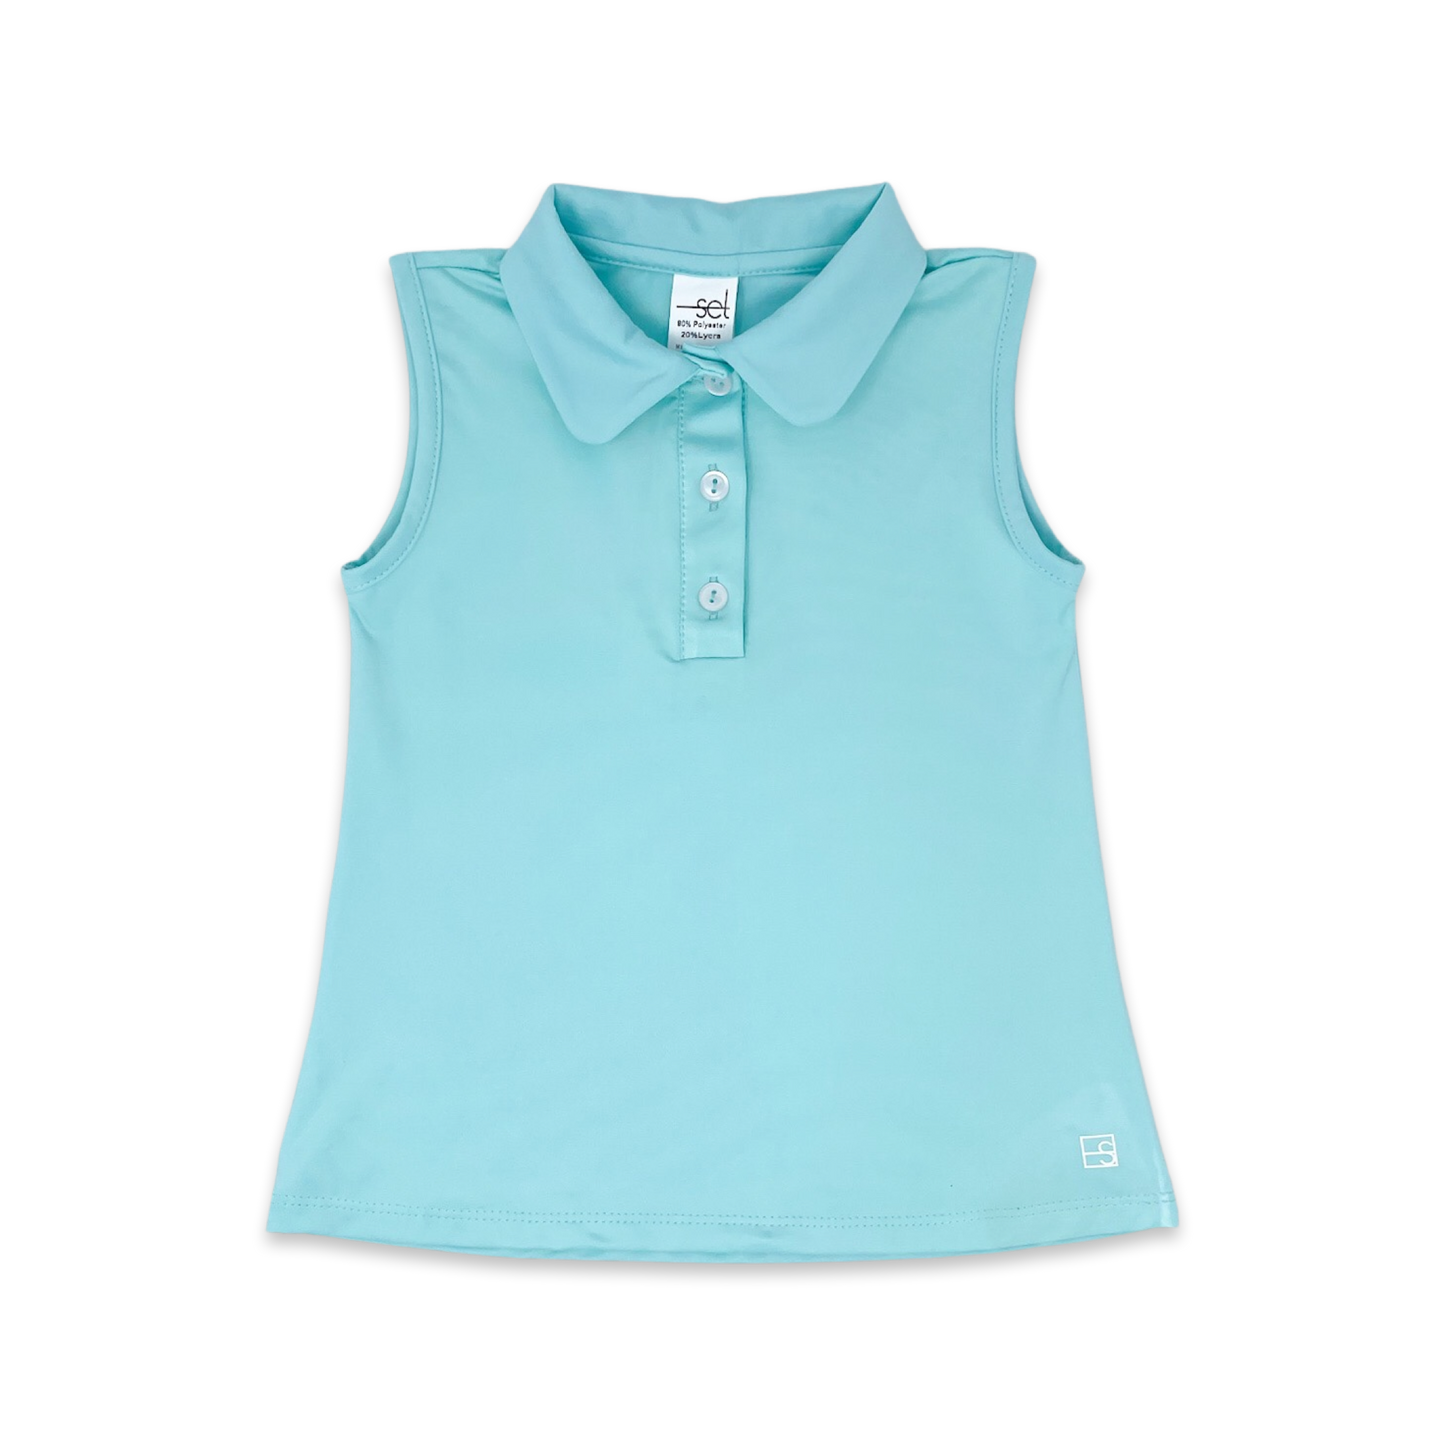 Gabby Shirt - Totally Turquoise